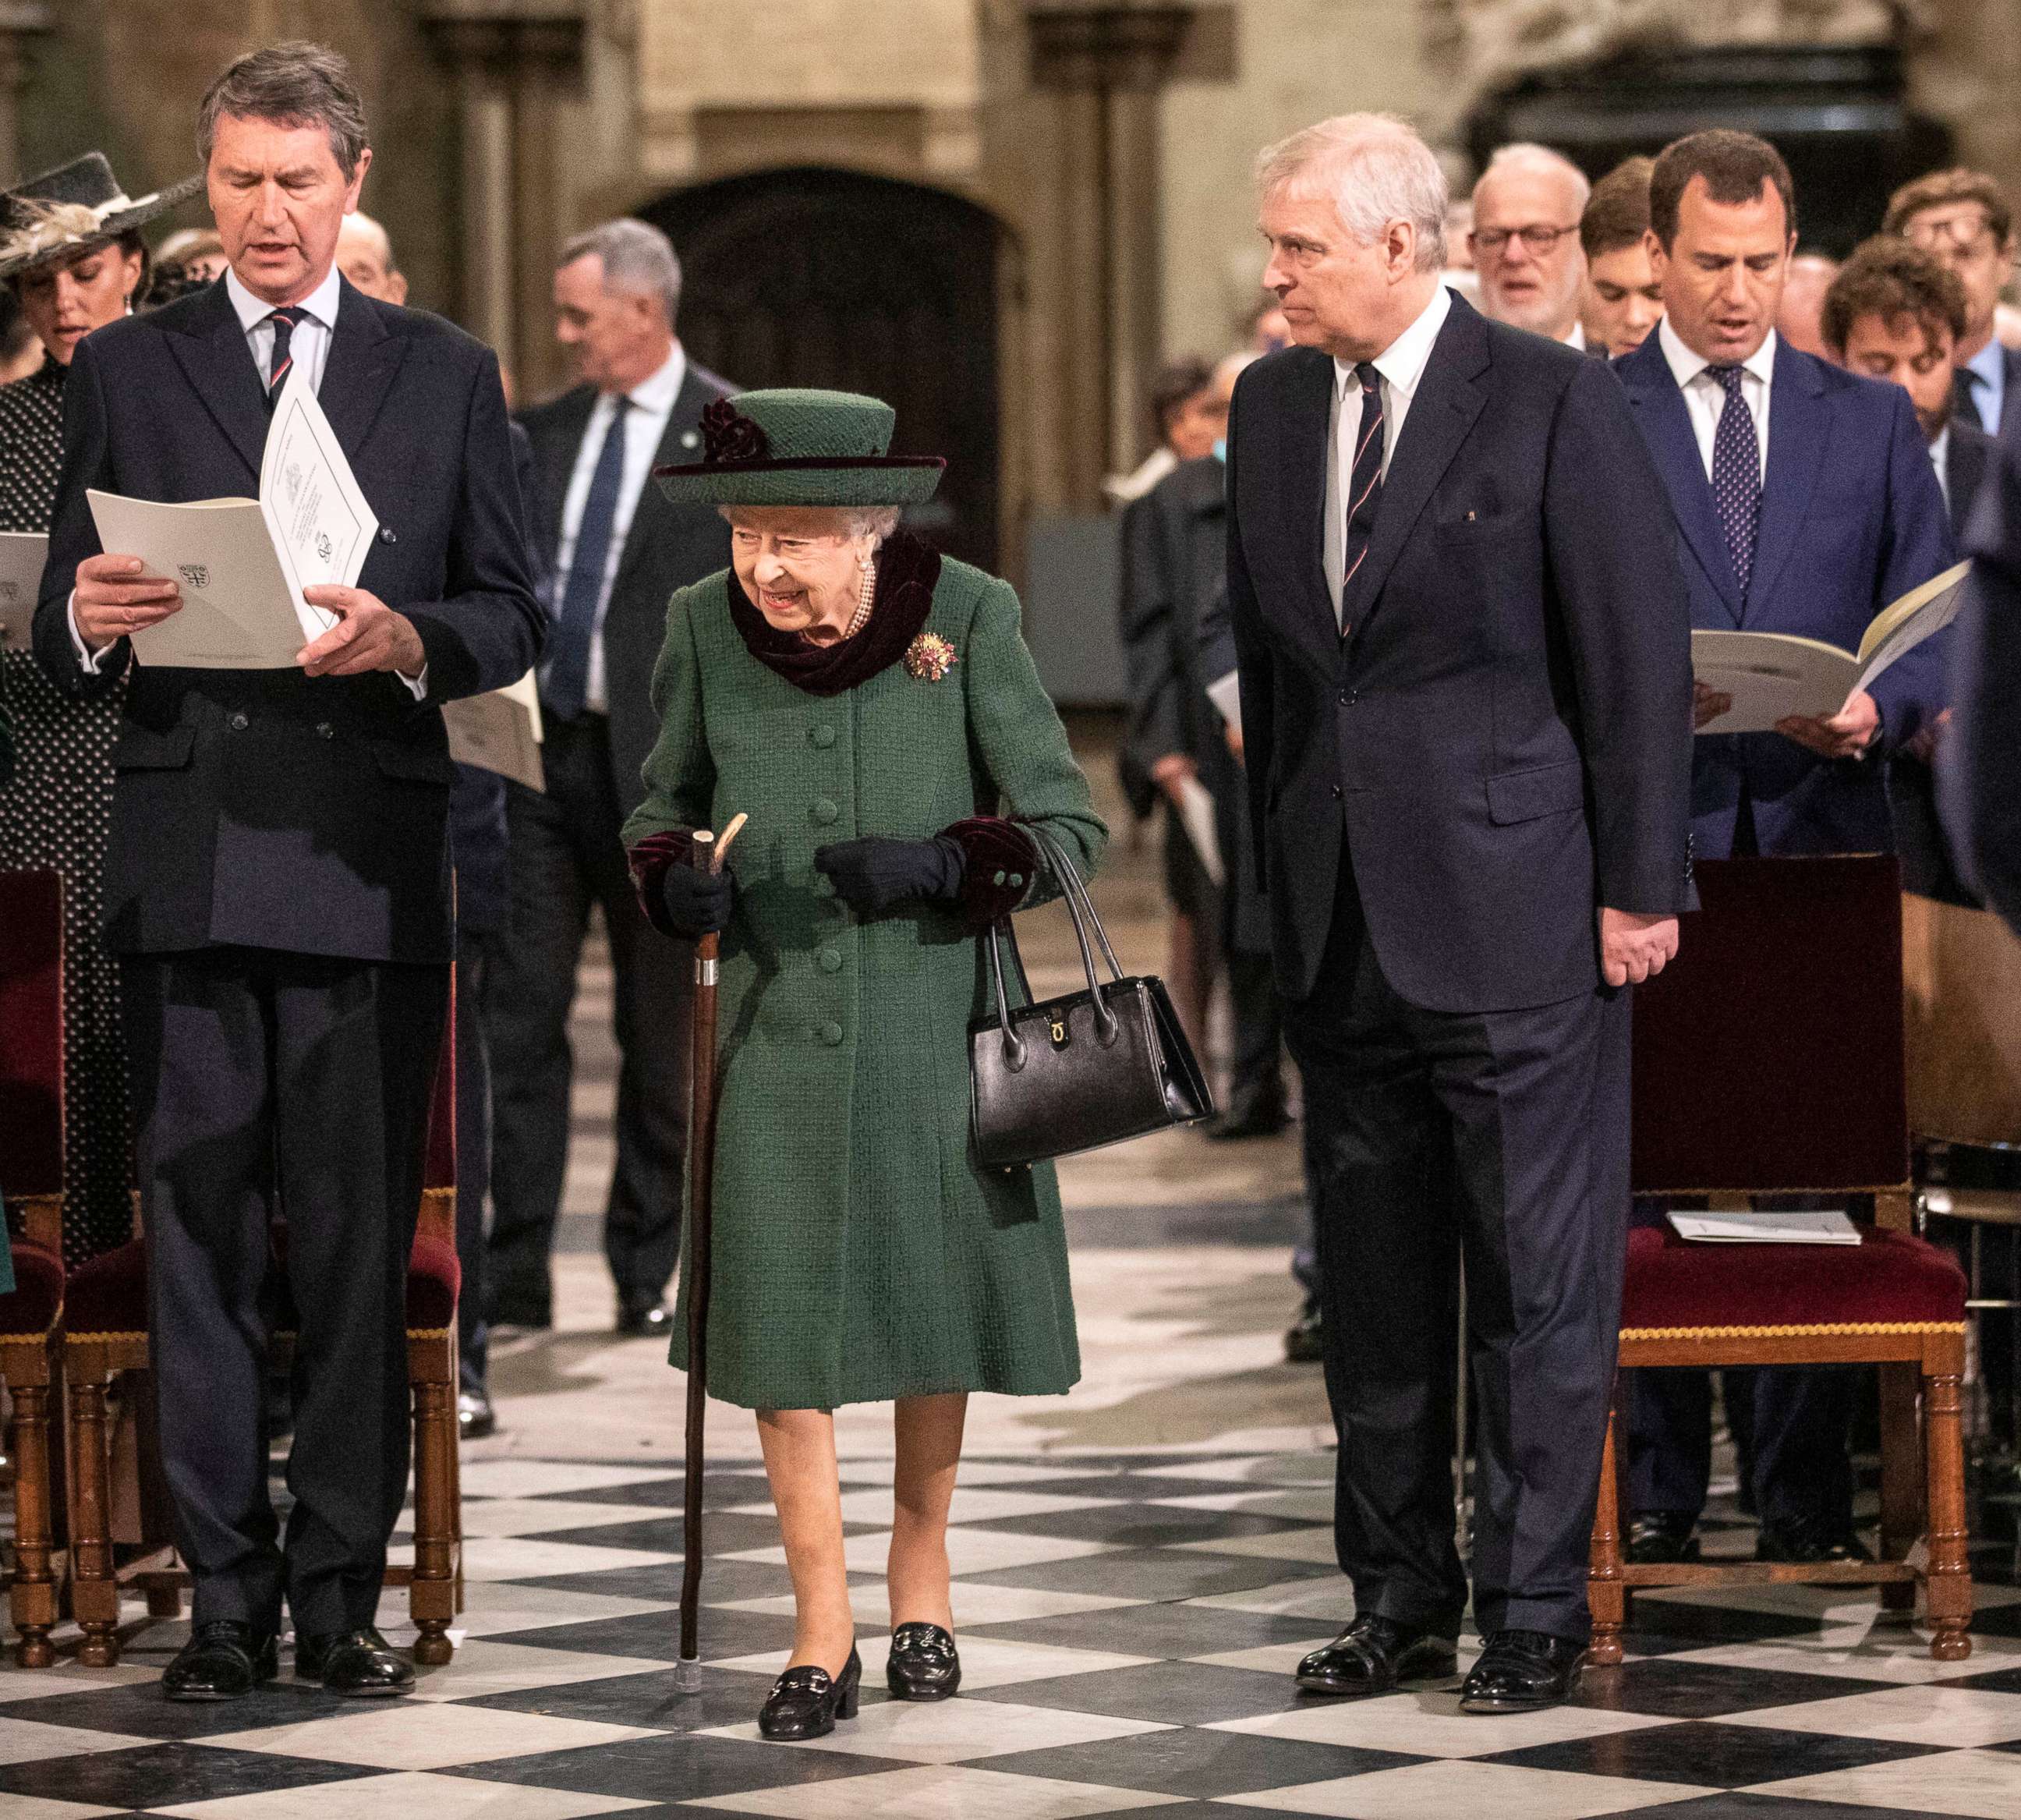 PHOTO: Queen Elizabeth II and Prince Andrew arrive for a Service of Thanksgiving for the life of Prince Philip, Duke of Edinburgh, at Westminster Abbey in London, March 29, 2022.